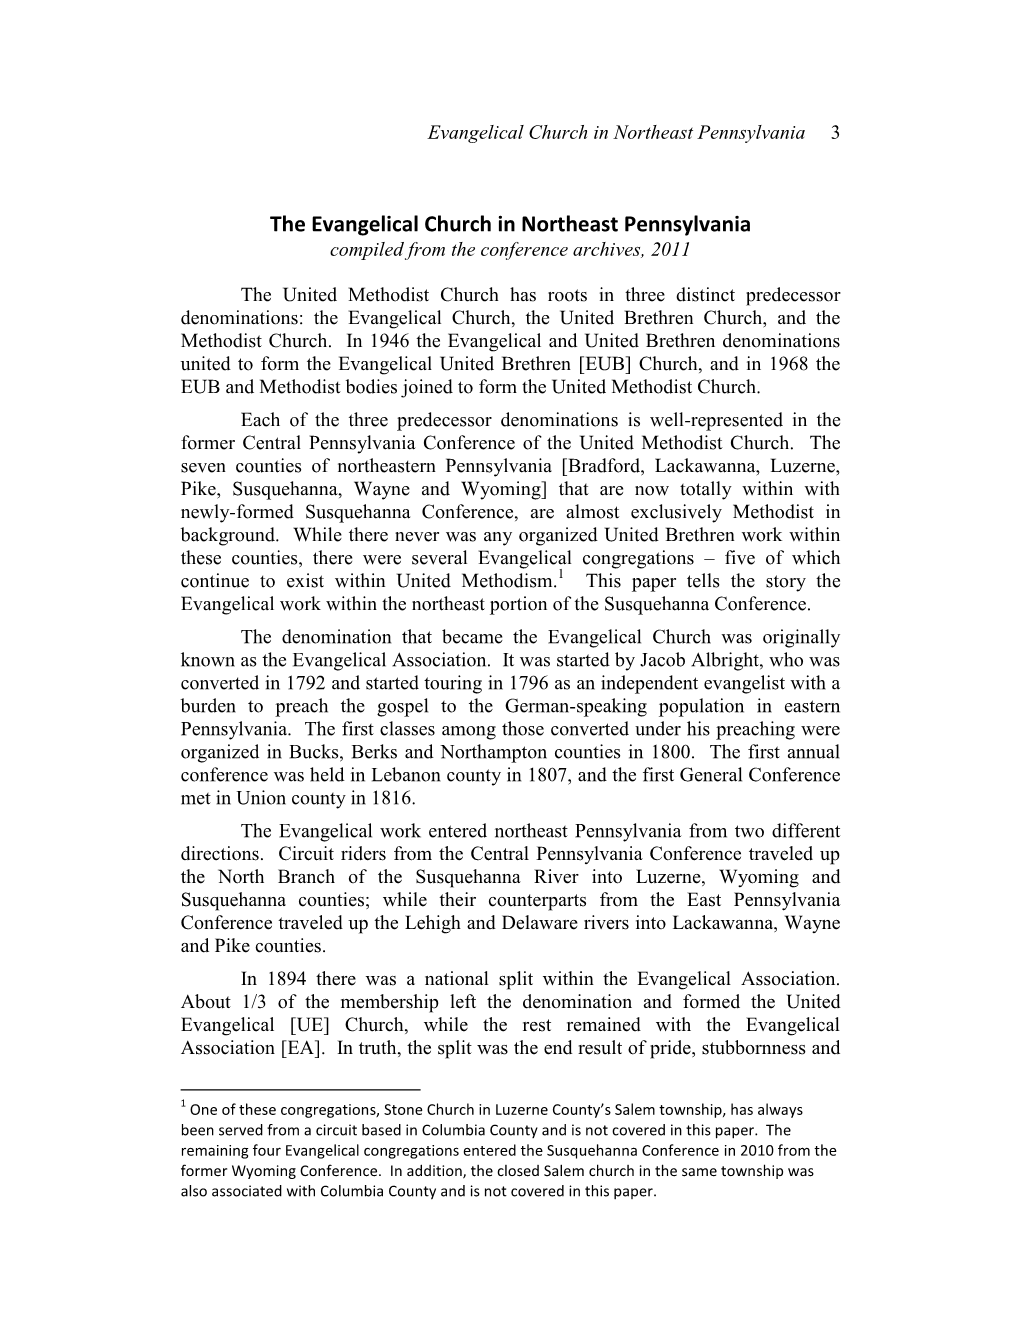 The Evangelical Church in Northeast Pennsylvania Compiled from the Conference Archives, 2011